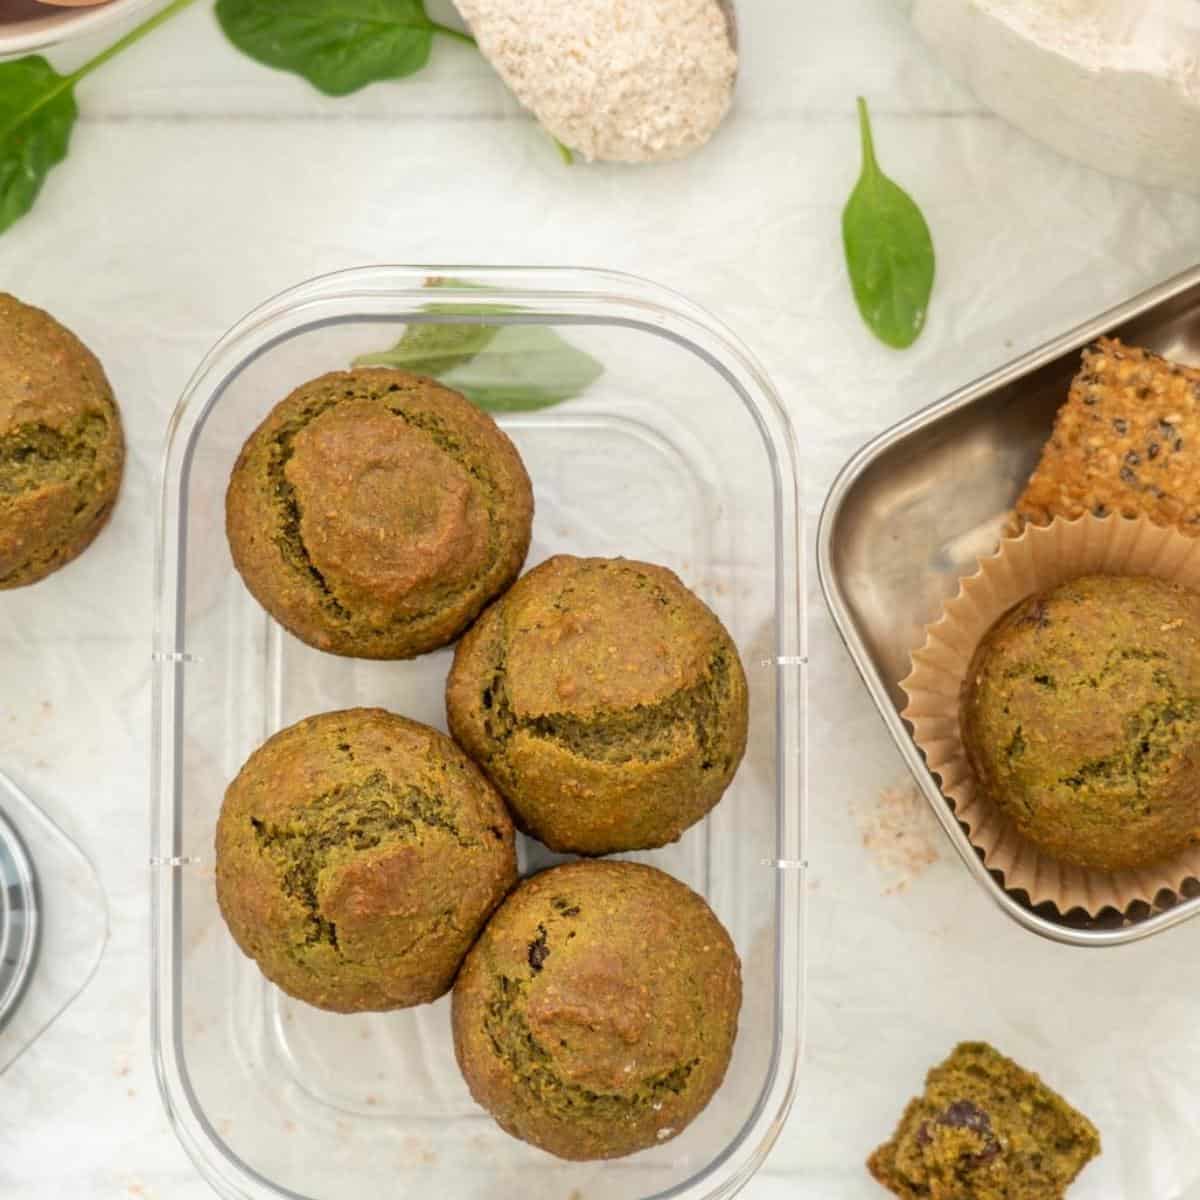 Four muffins in an airtight container next to a stainless steel lunch box packed with a muffin, crackers and fruit.